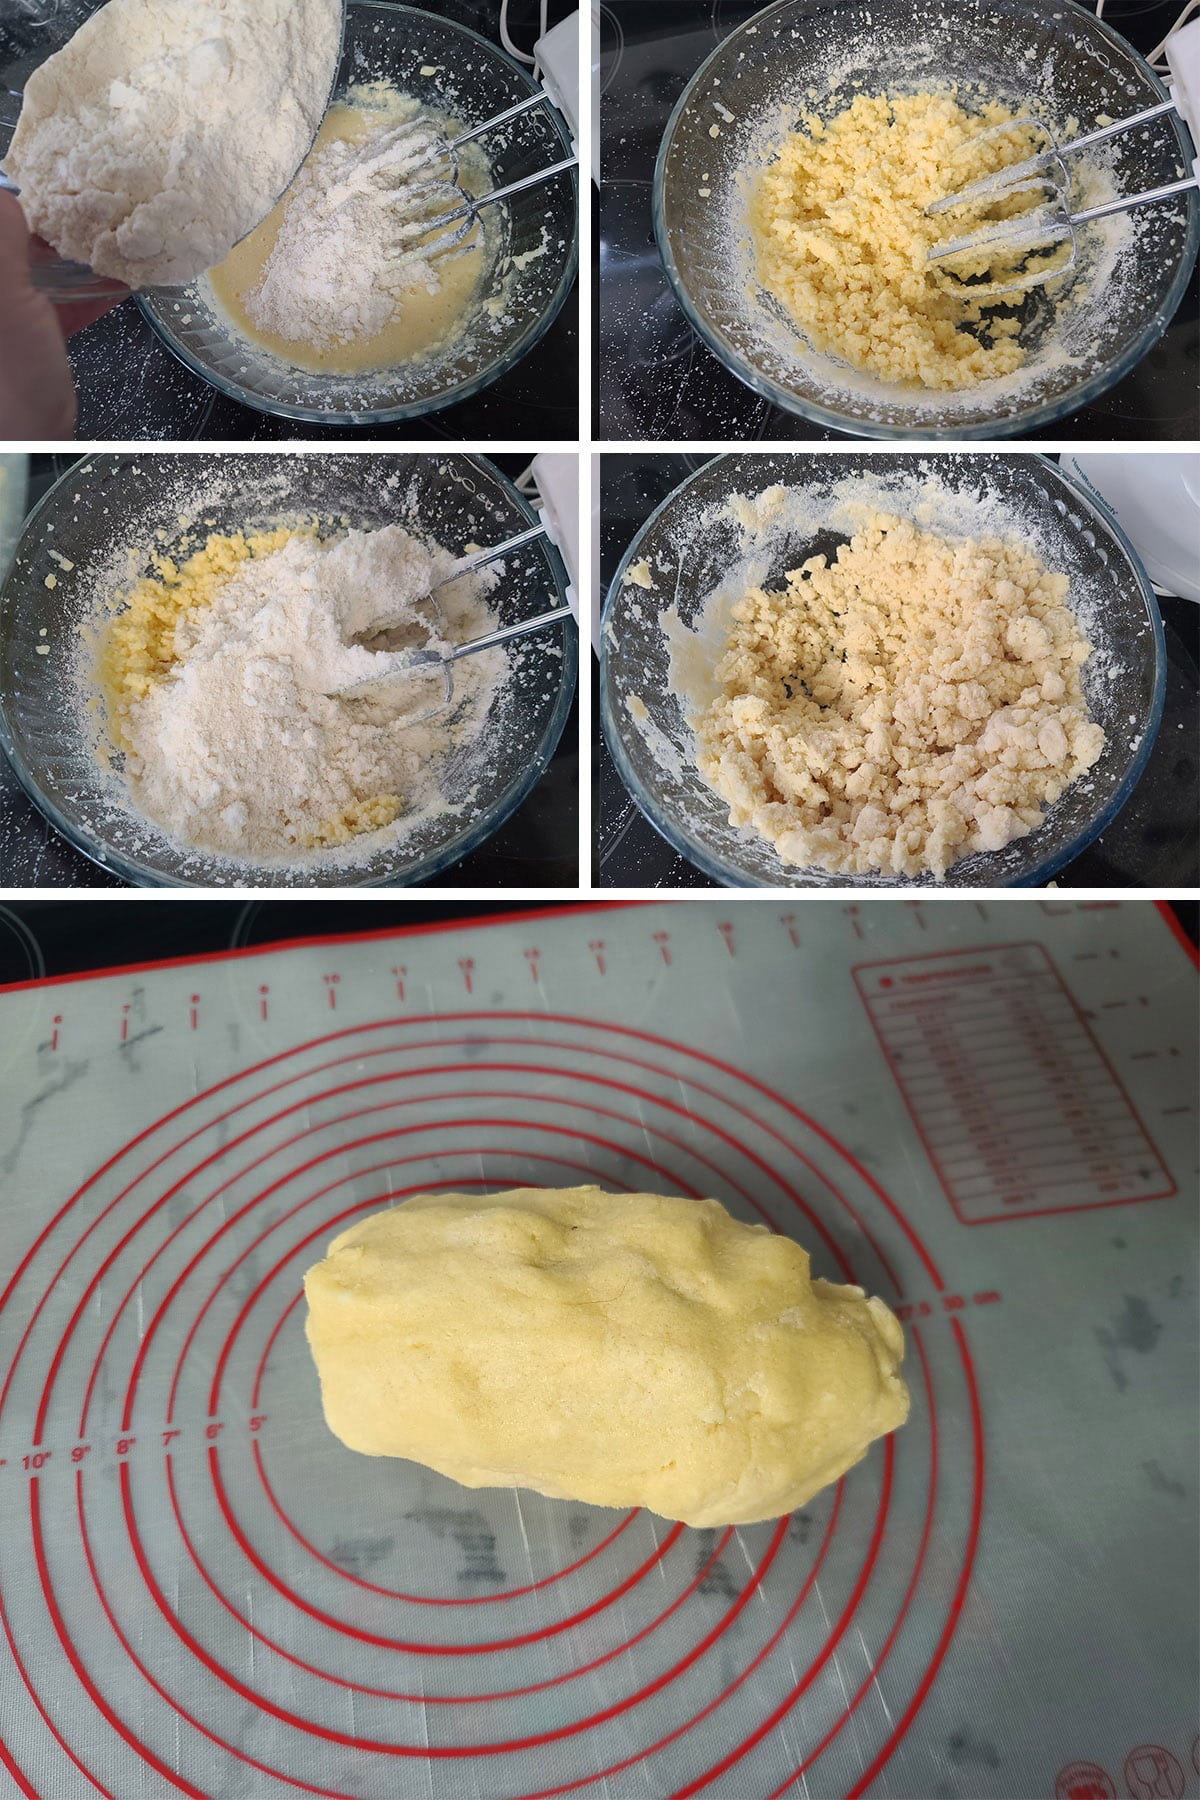 A 5 part image showing the dry ingredients being added to the wet ingredients, forming a smooth dough.